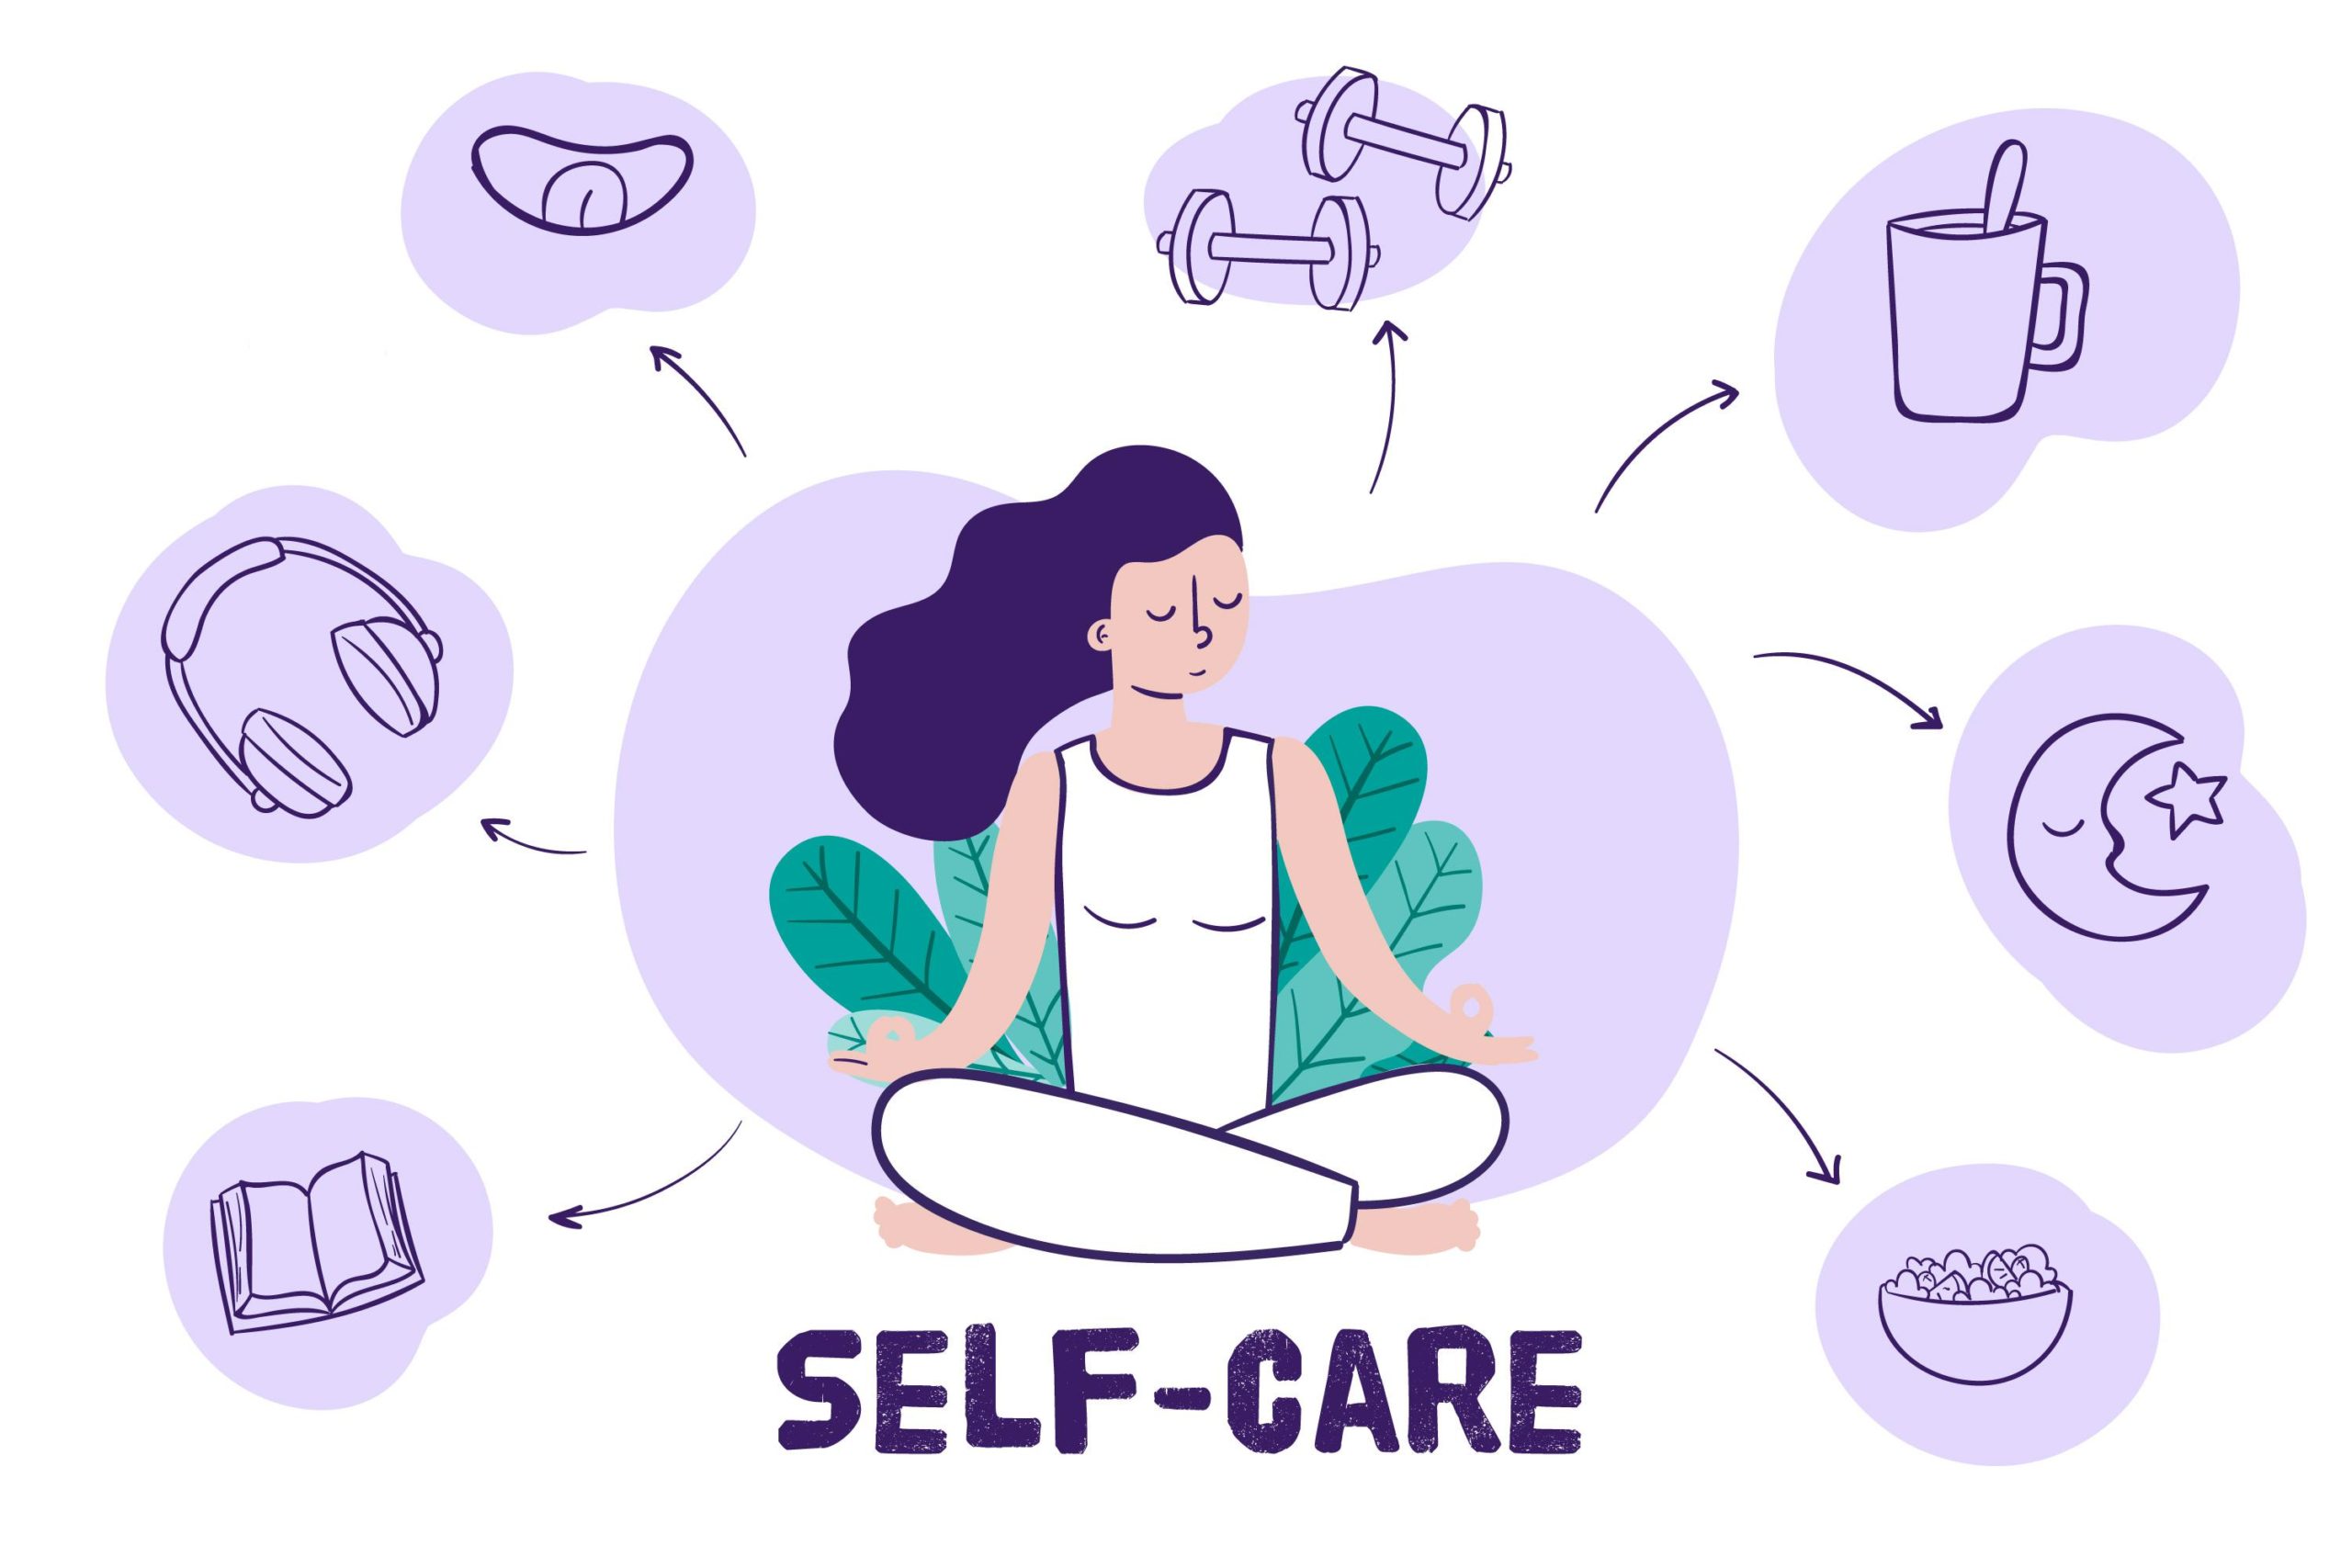 Tips for first year teacher #15: Taking care of yourself